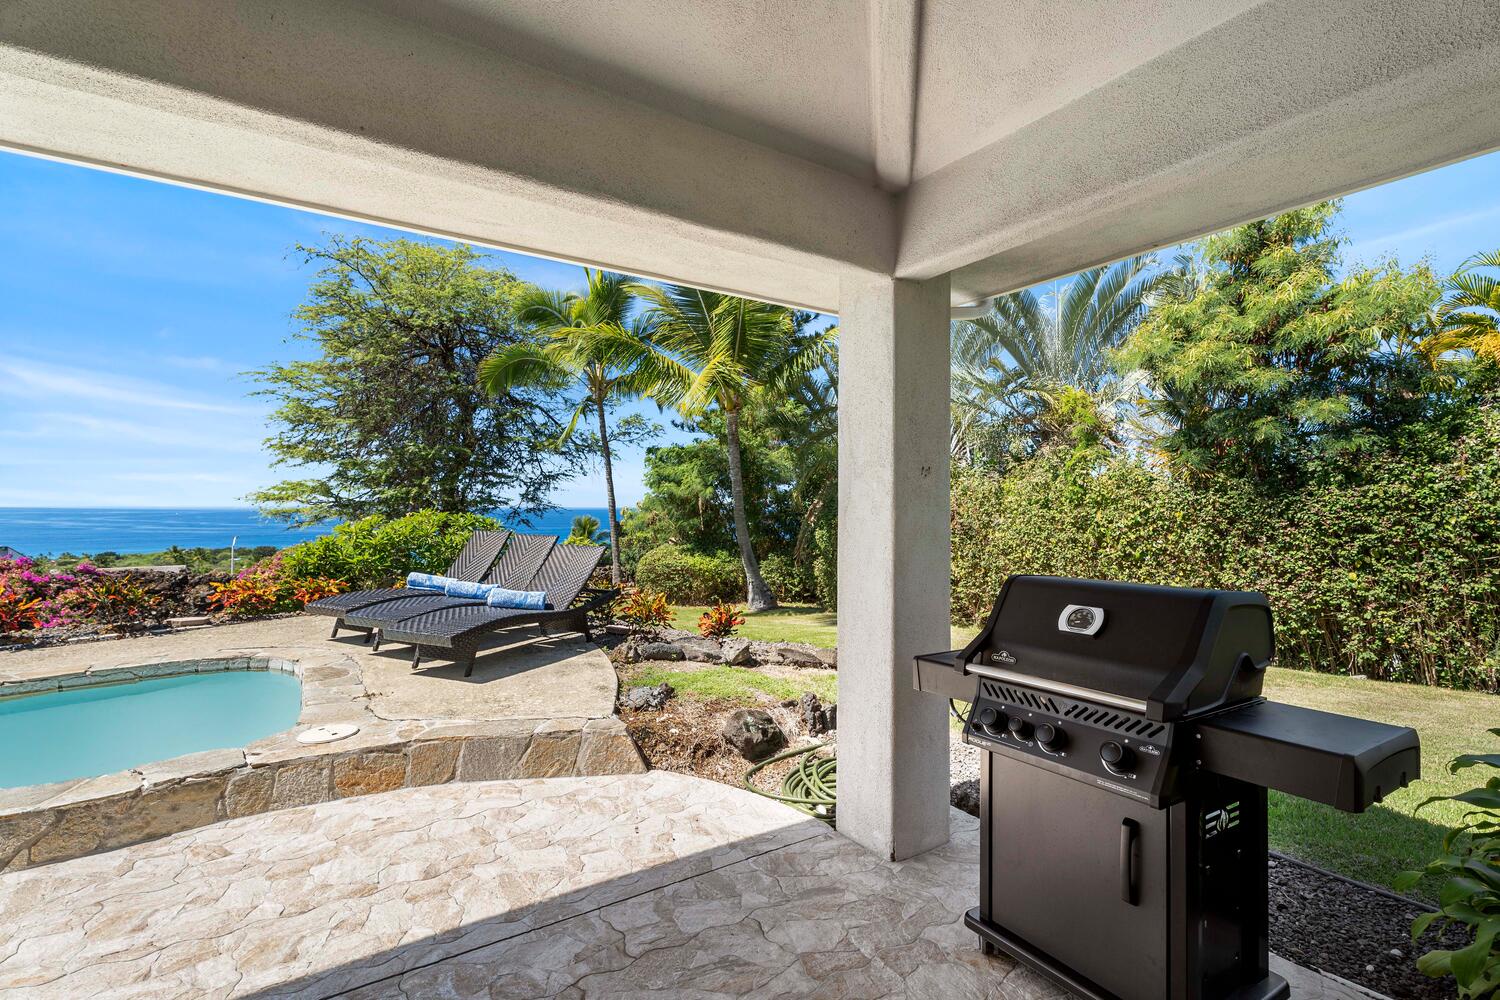 Kailua Kona Vacation Rentals, Ho'okipa Hale - Grill to perfection at the lanai BBQ, a social hub by the pool for sizzling meals and warm Gatherings.